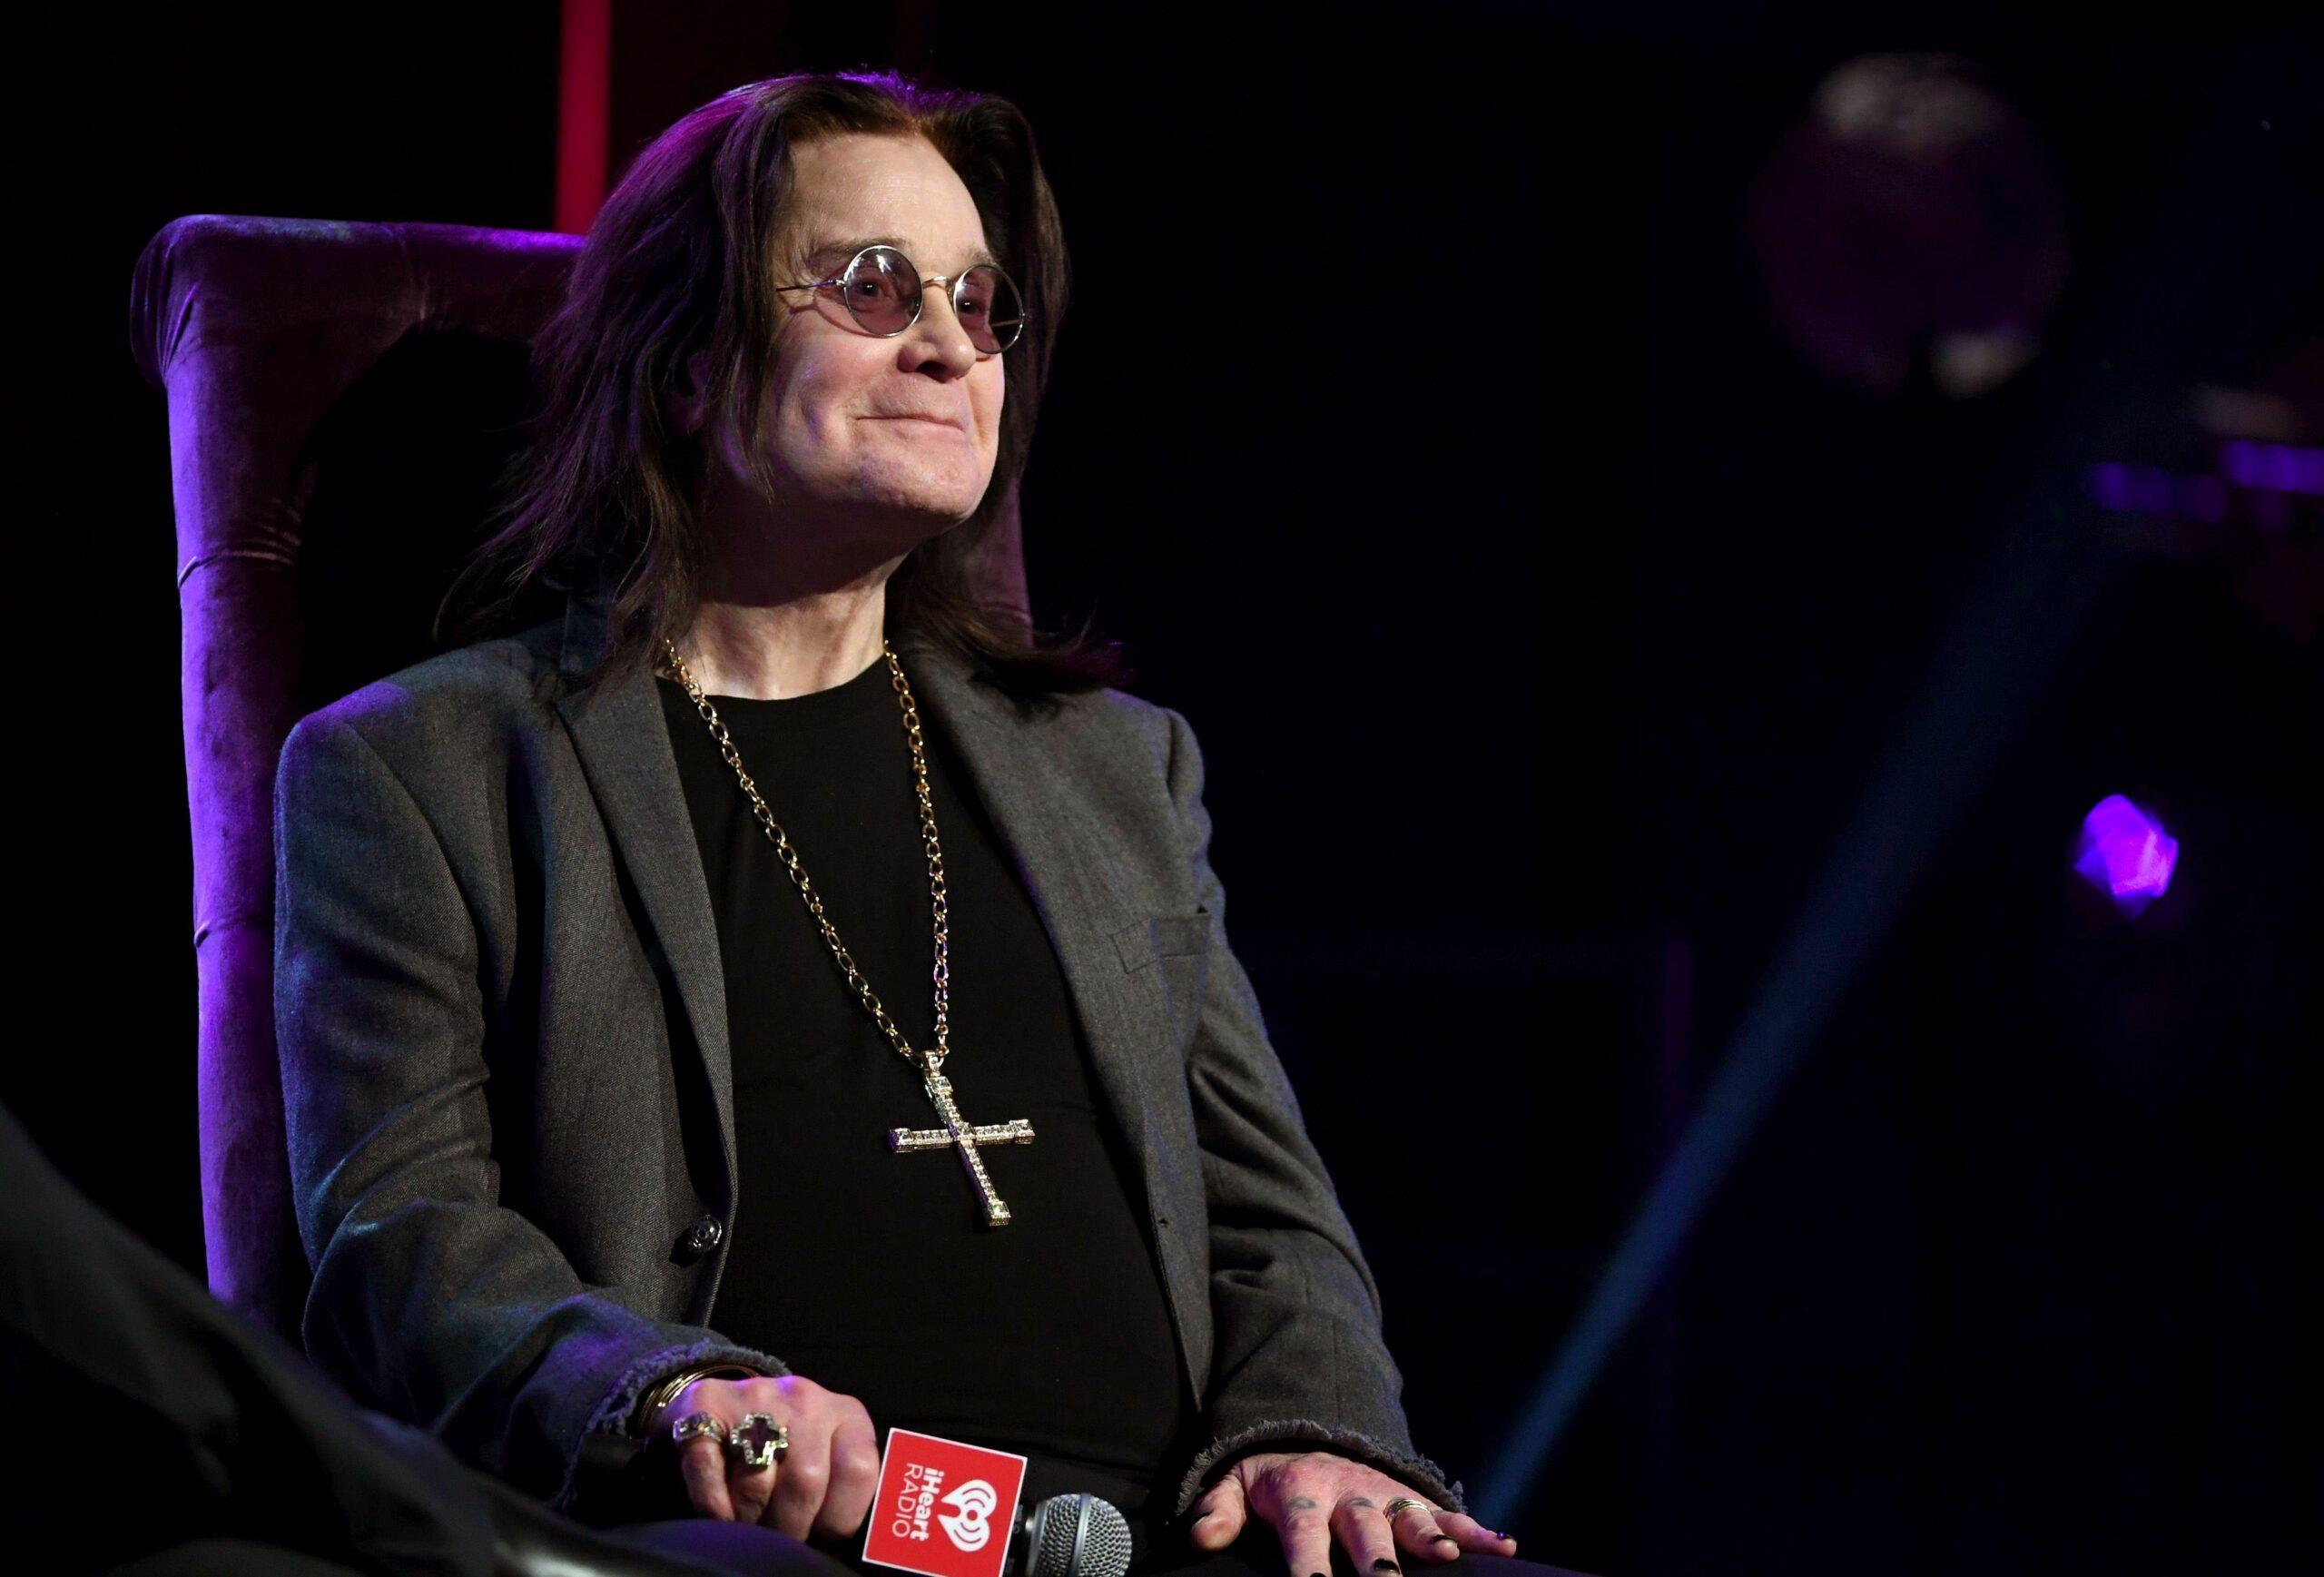 Ozzy Osbourne speaks onstage at iHeartRadio ICONS with Ozzy Osbourne: In Celebration of Ordinary Man at iHeartRadio Theater on February 24, 2020